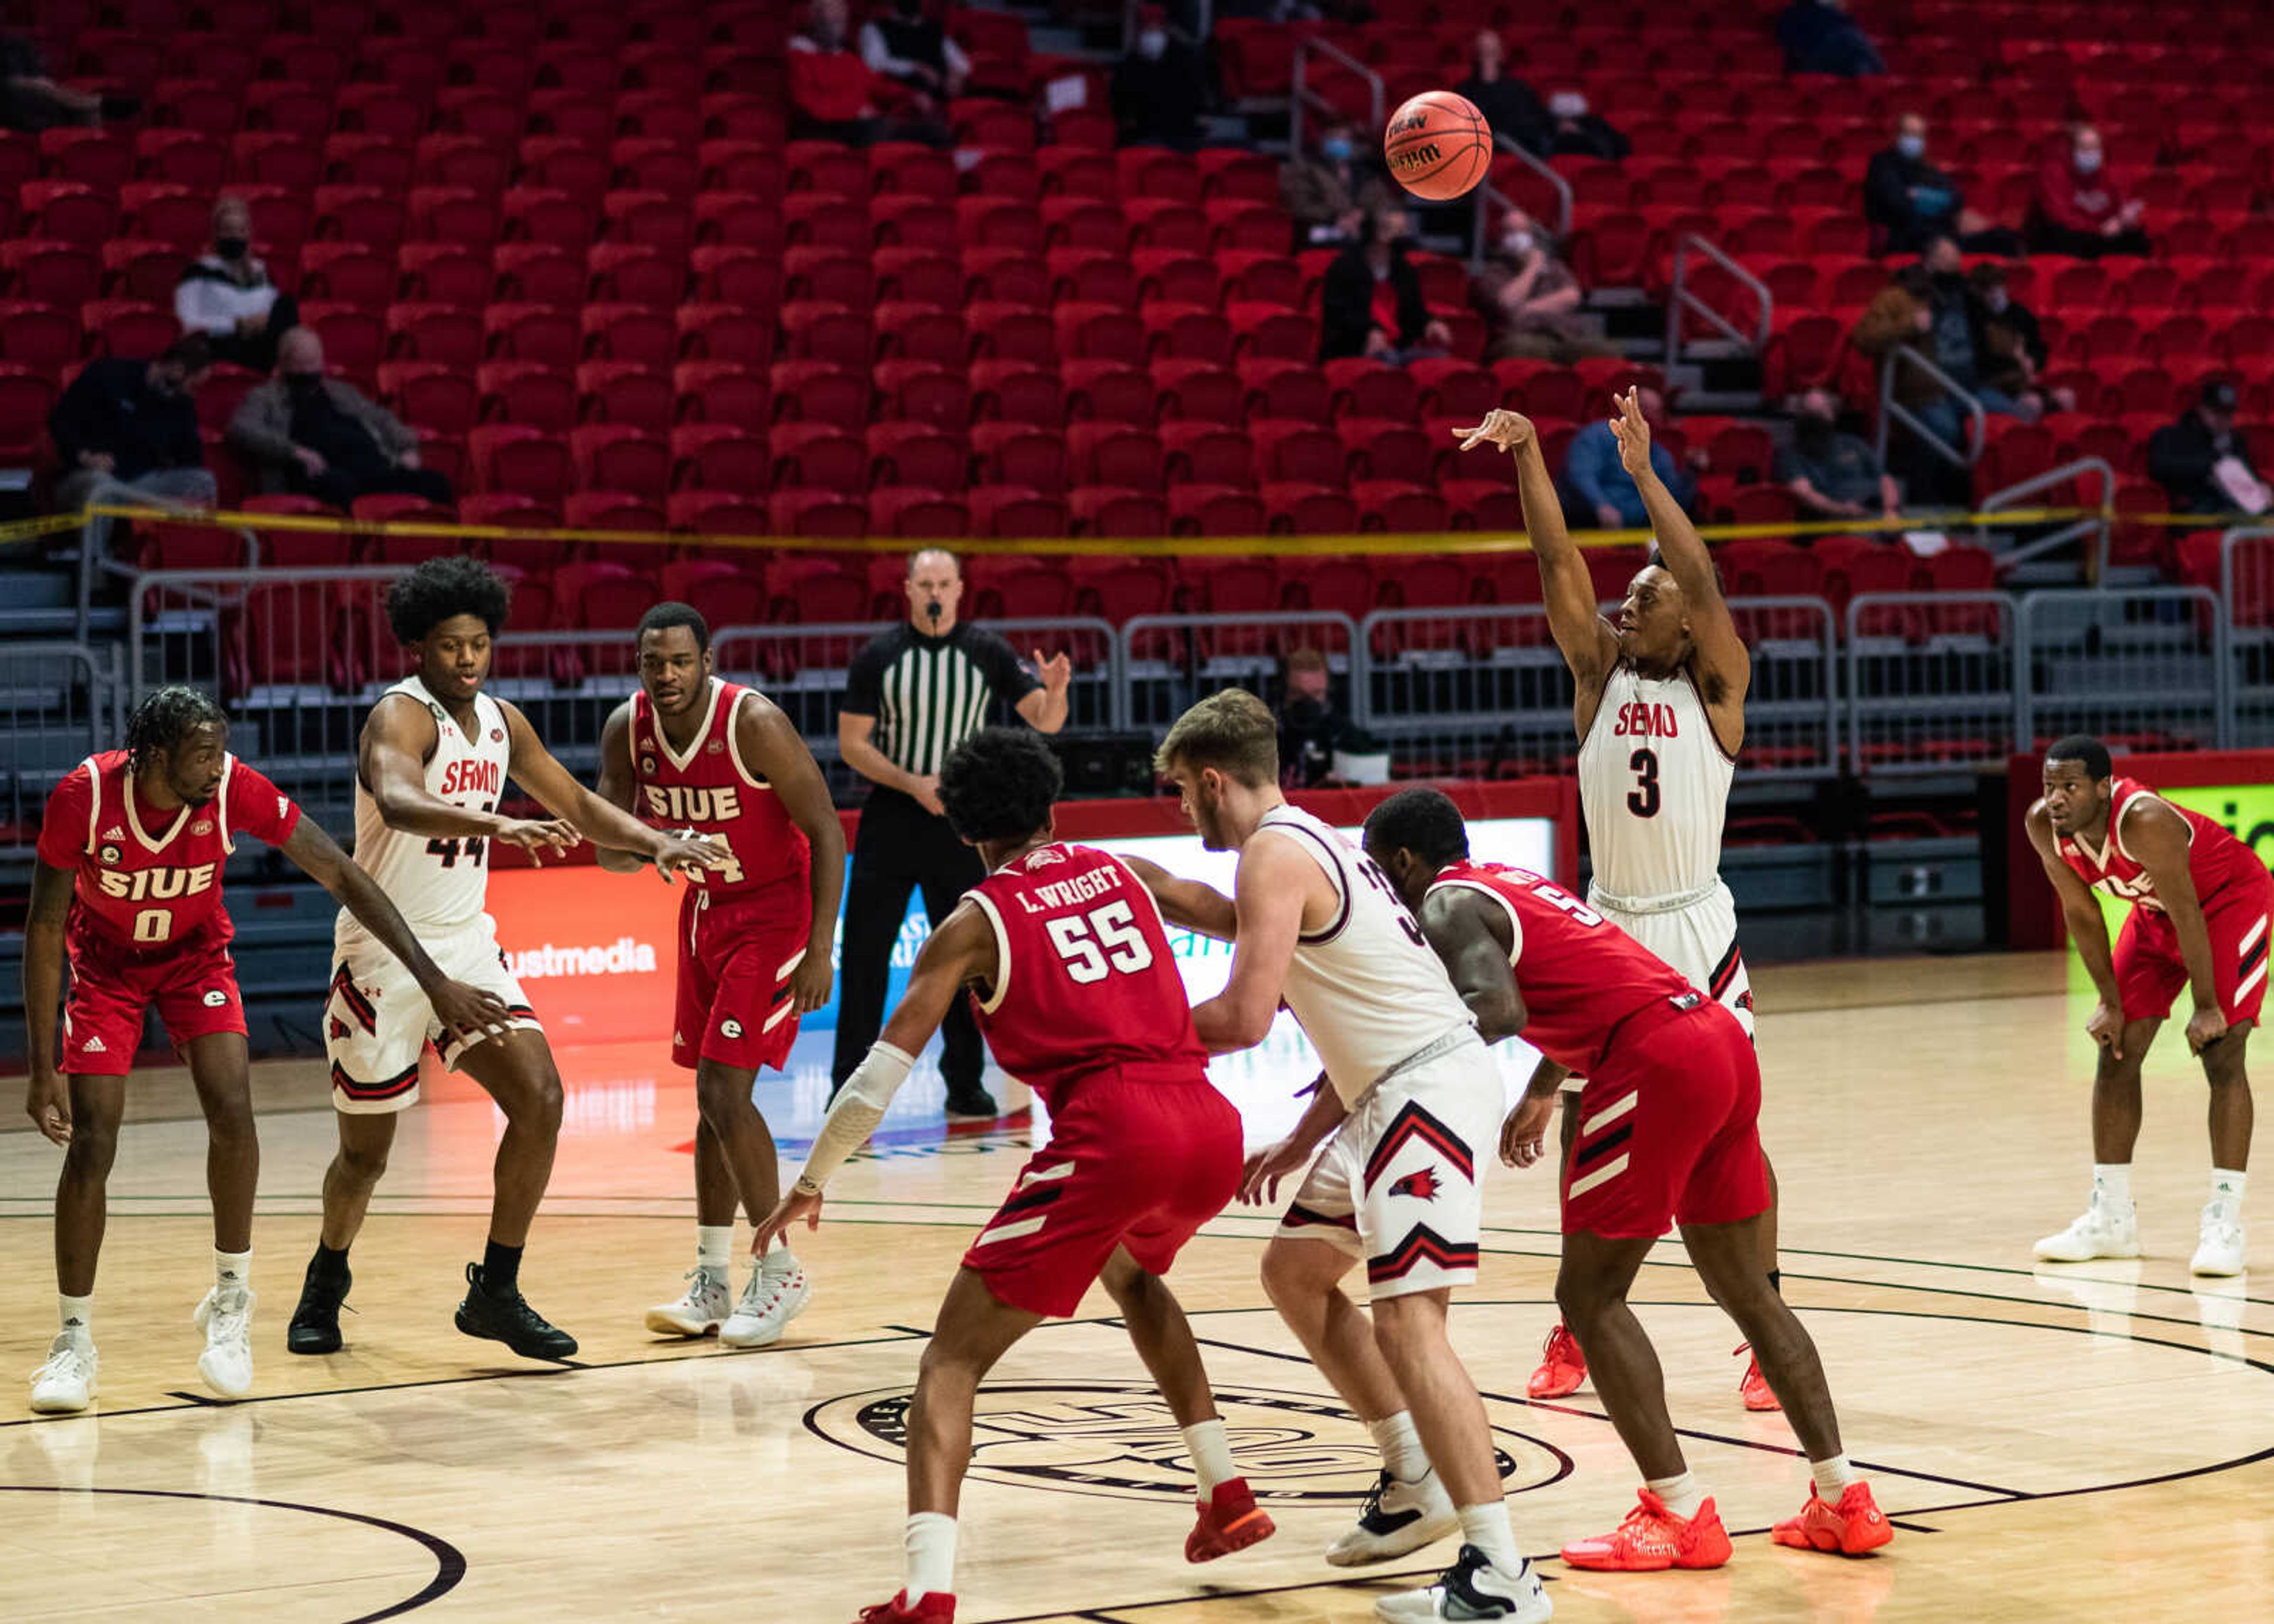 Junior guard Eric Reed Jr. attempts a free throw during a game against Southern Illinois University Edwardsville on Jan. 28 at the Show Me Center in Cape Girardeau. Reed led the Redhawks in three point percentage last season, shooting 45.9% from deep.